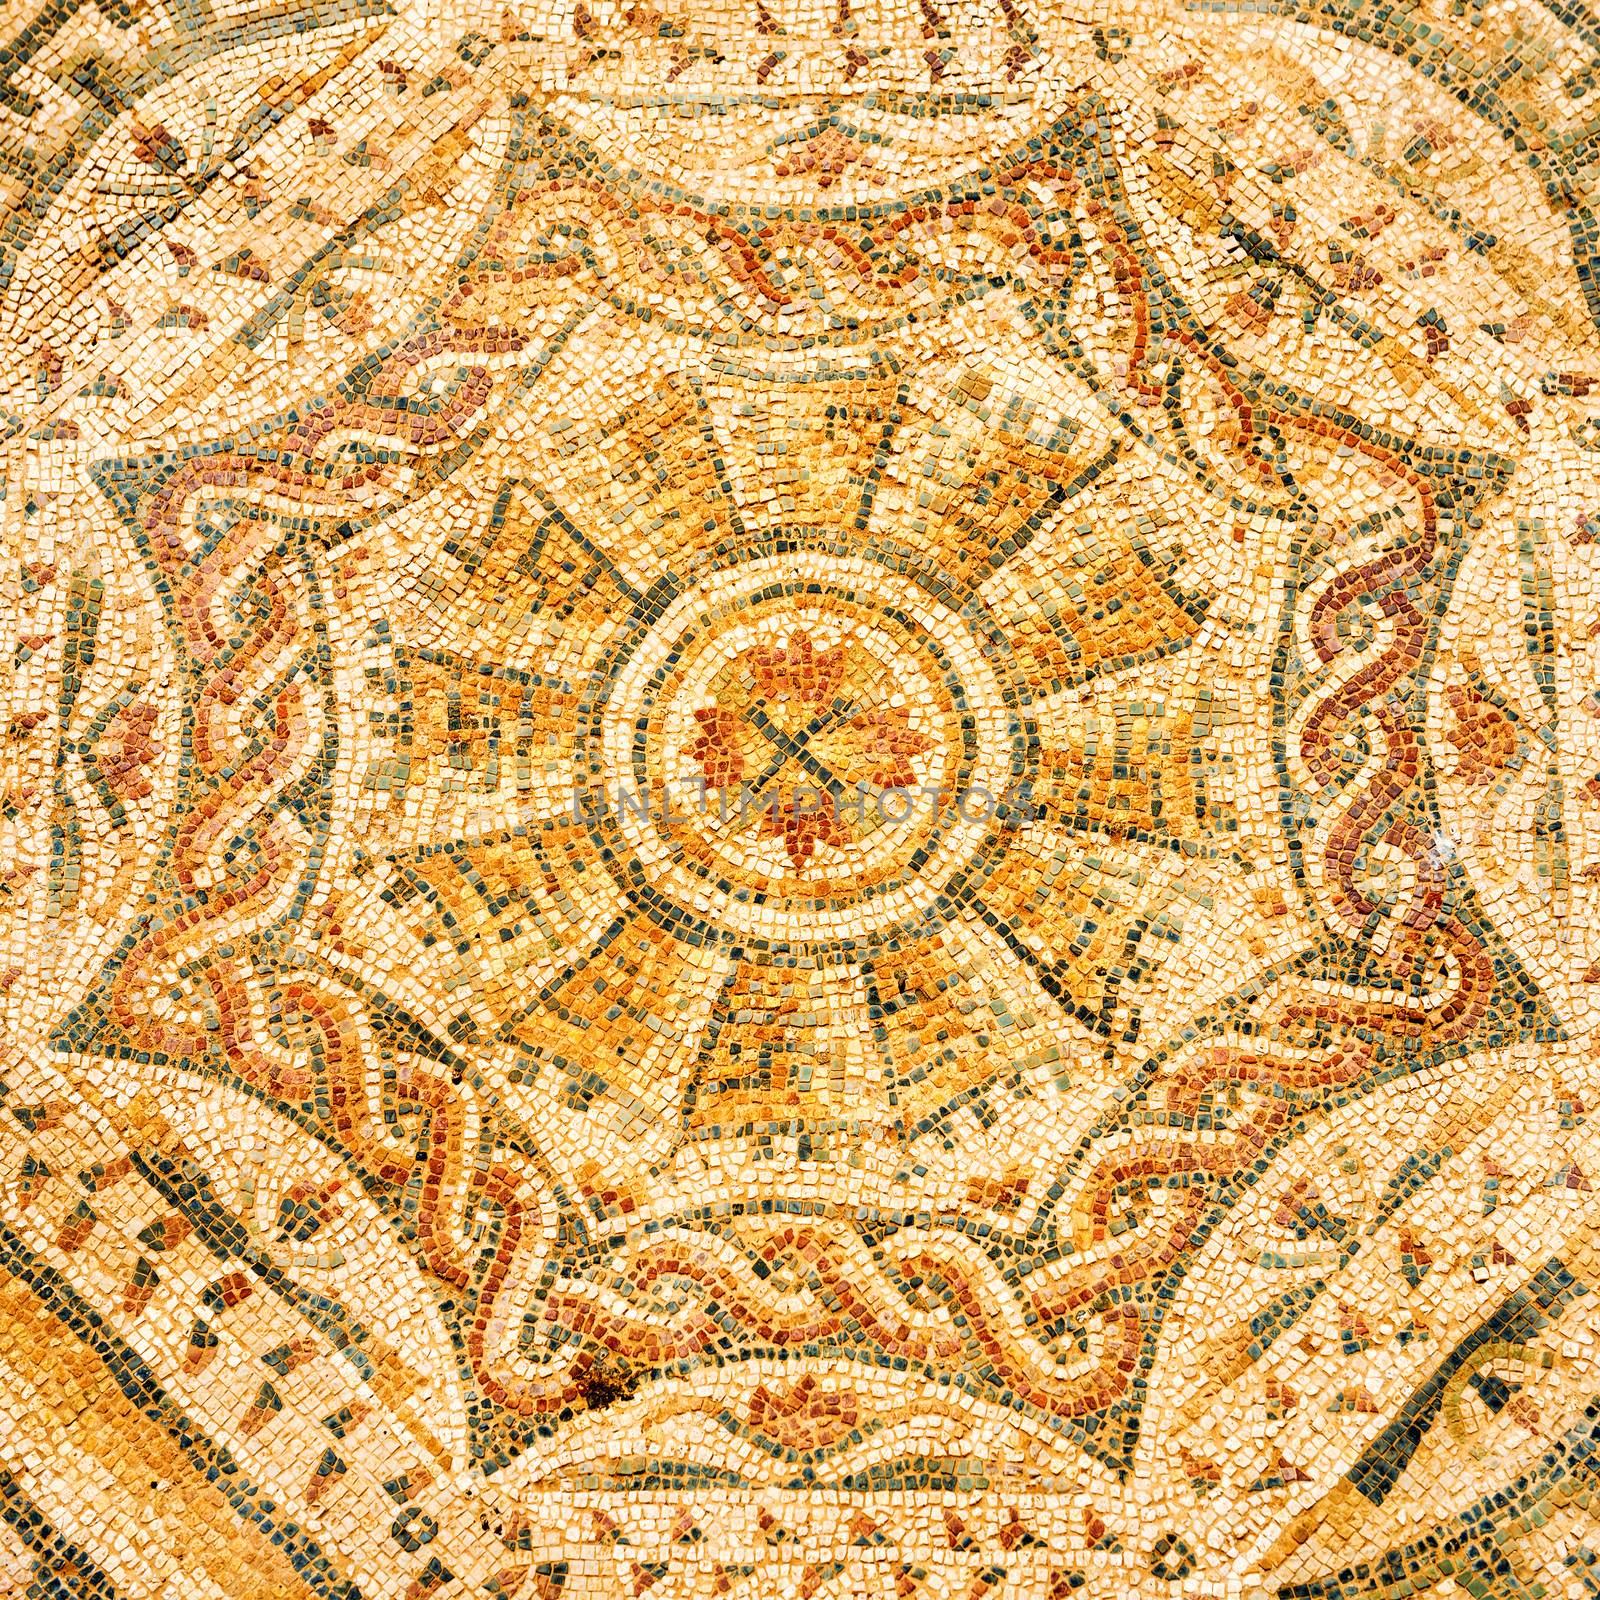 Ancient Greece marble pattern by vapi